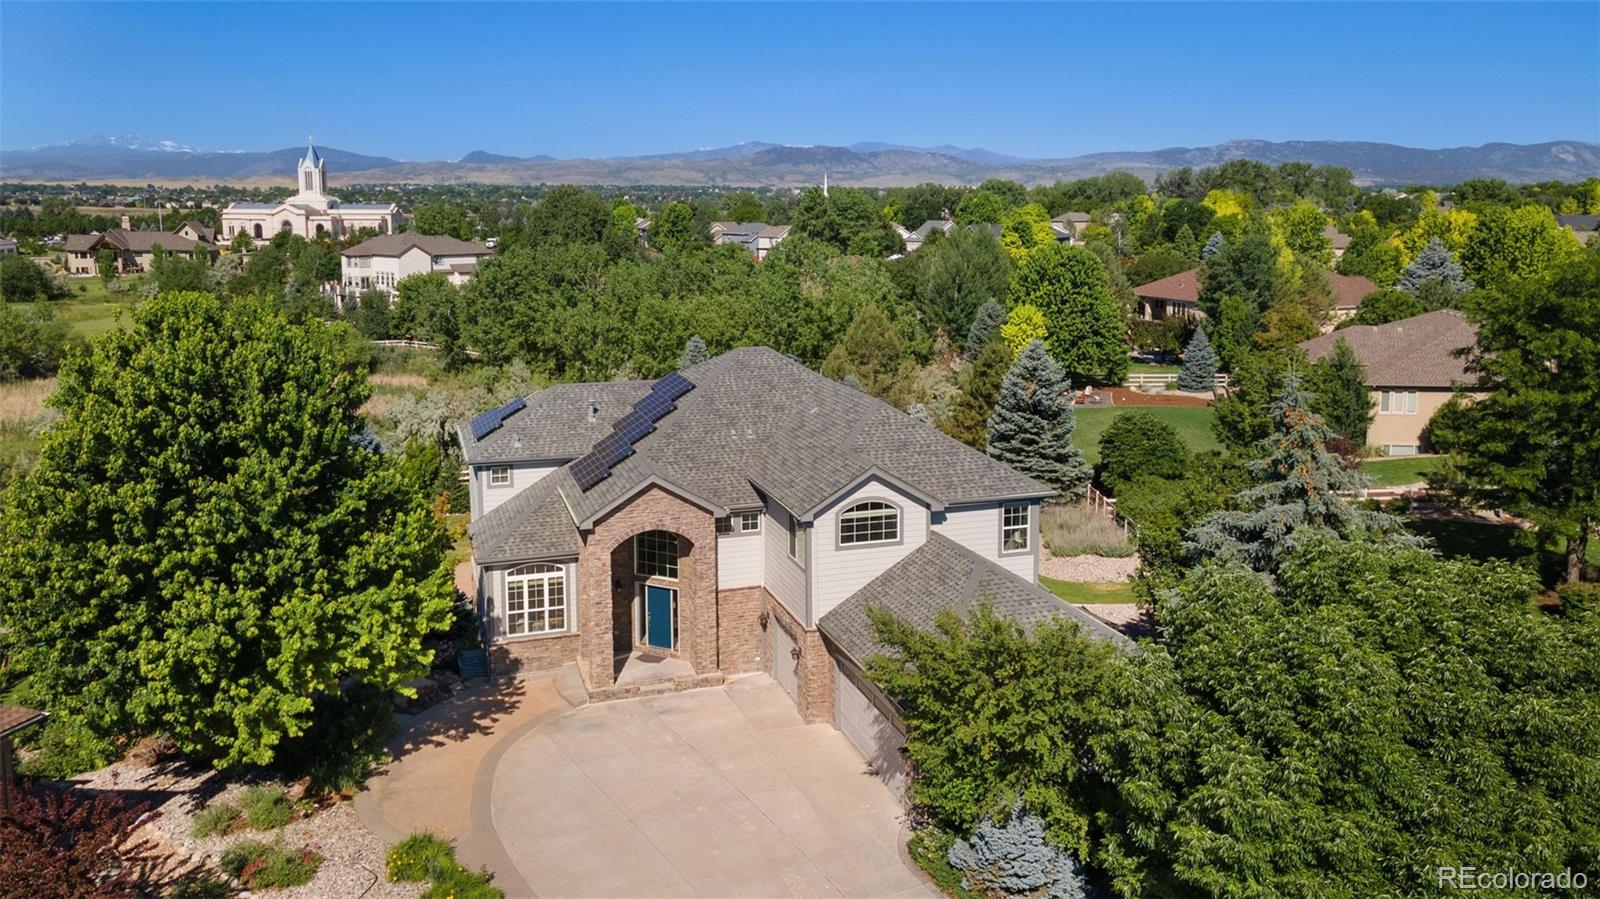 6509  Westchase Court, fort collins MLS: 8020842 Beds: 4 Baths: 4 Price: $1,575,000